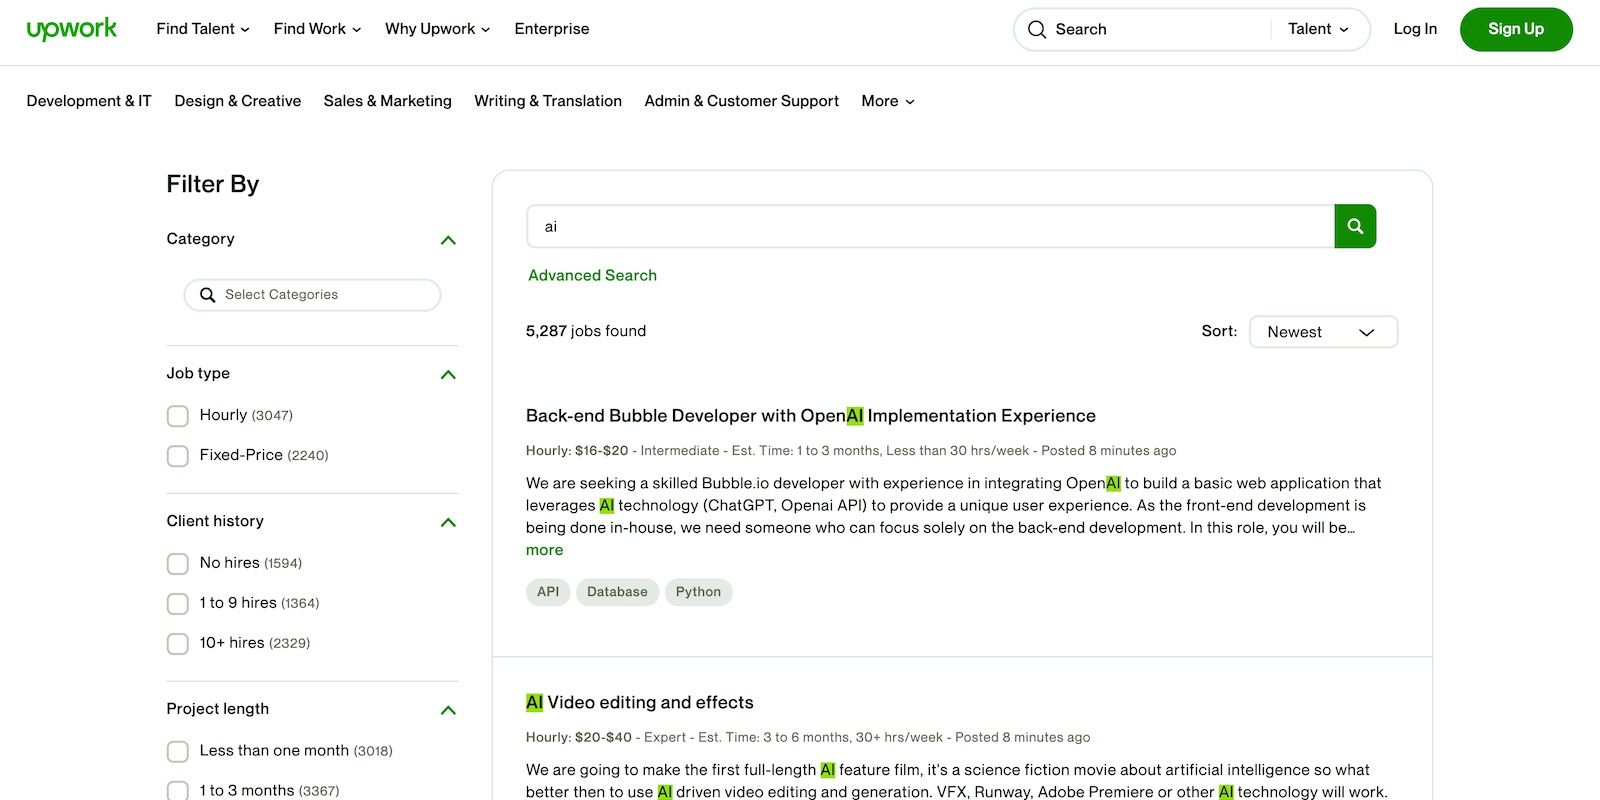 Job Search Results for AI on Upwork